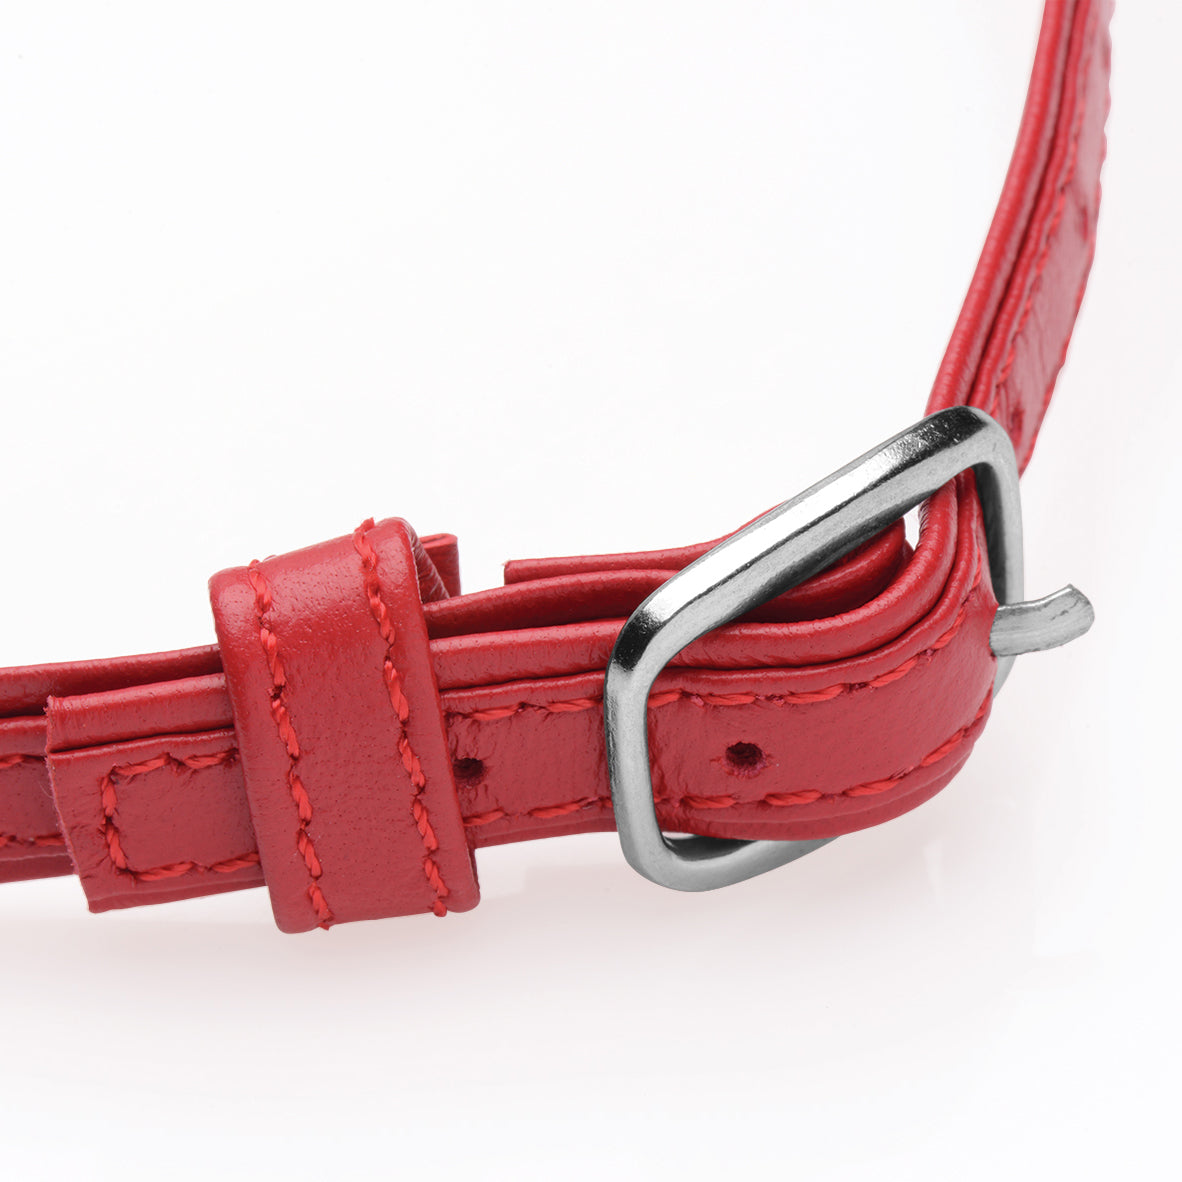 Heart Lock Leather Choker with Lock and Key - Red - UABDSM